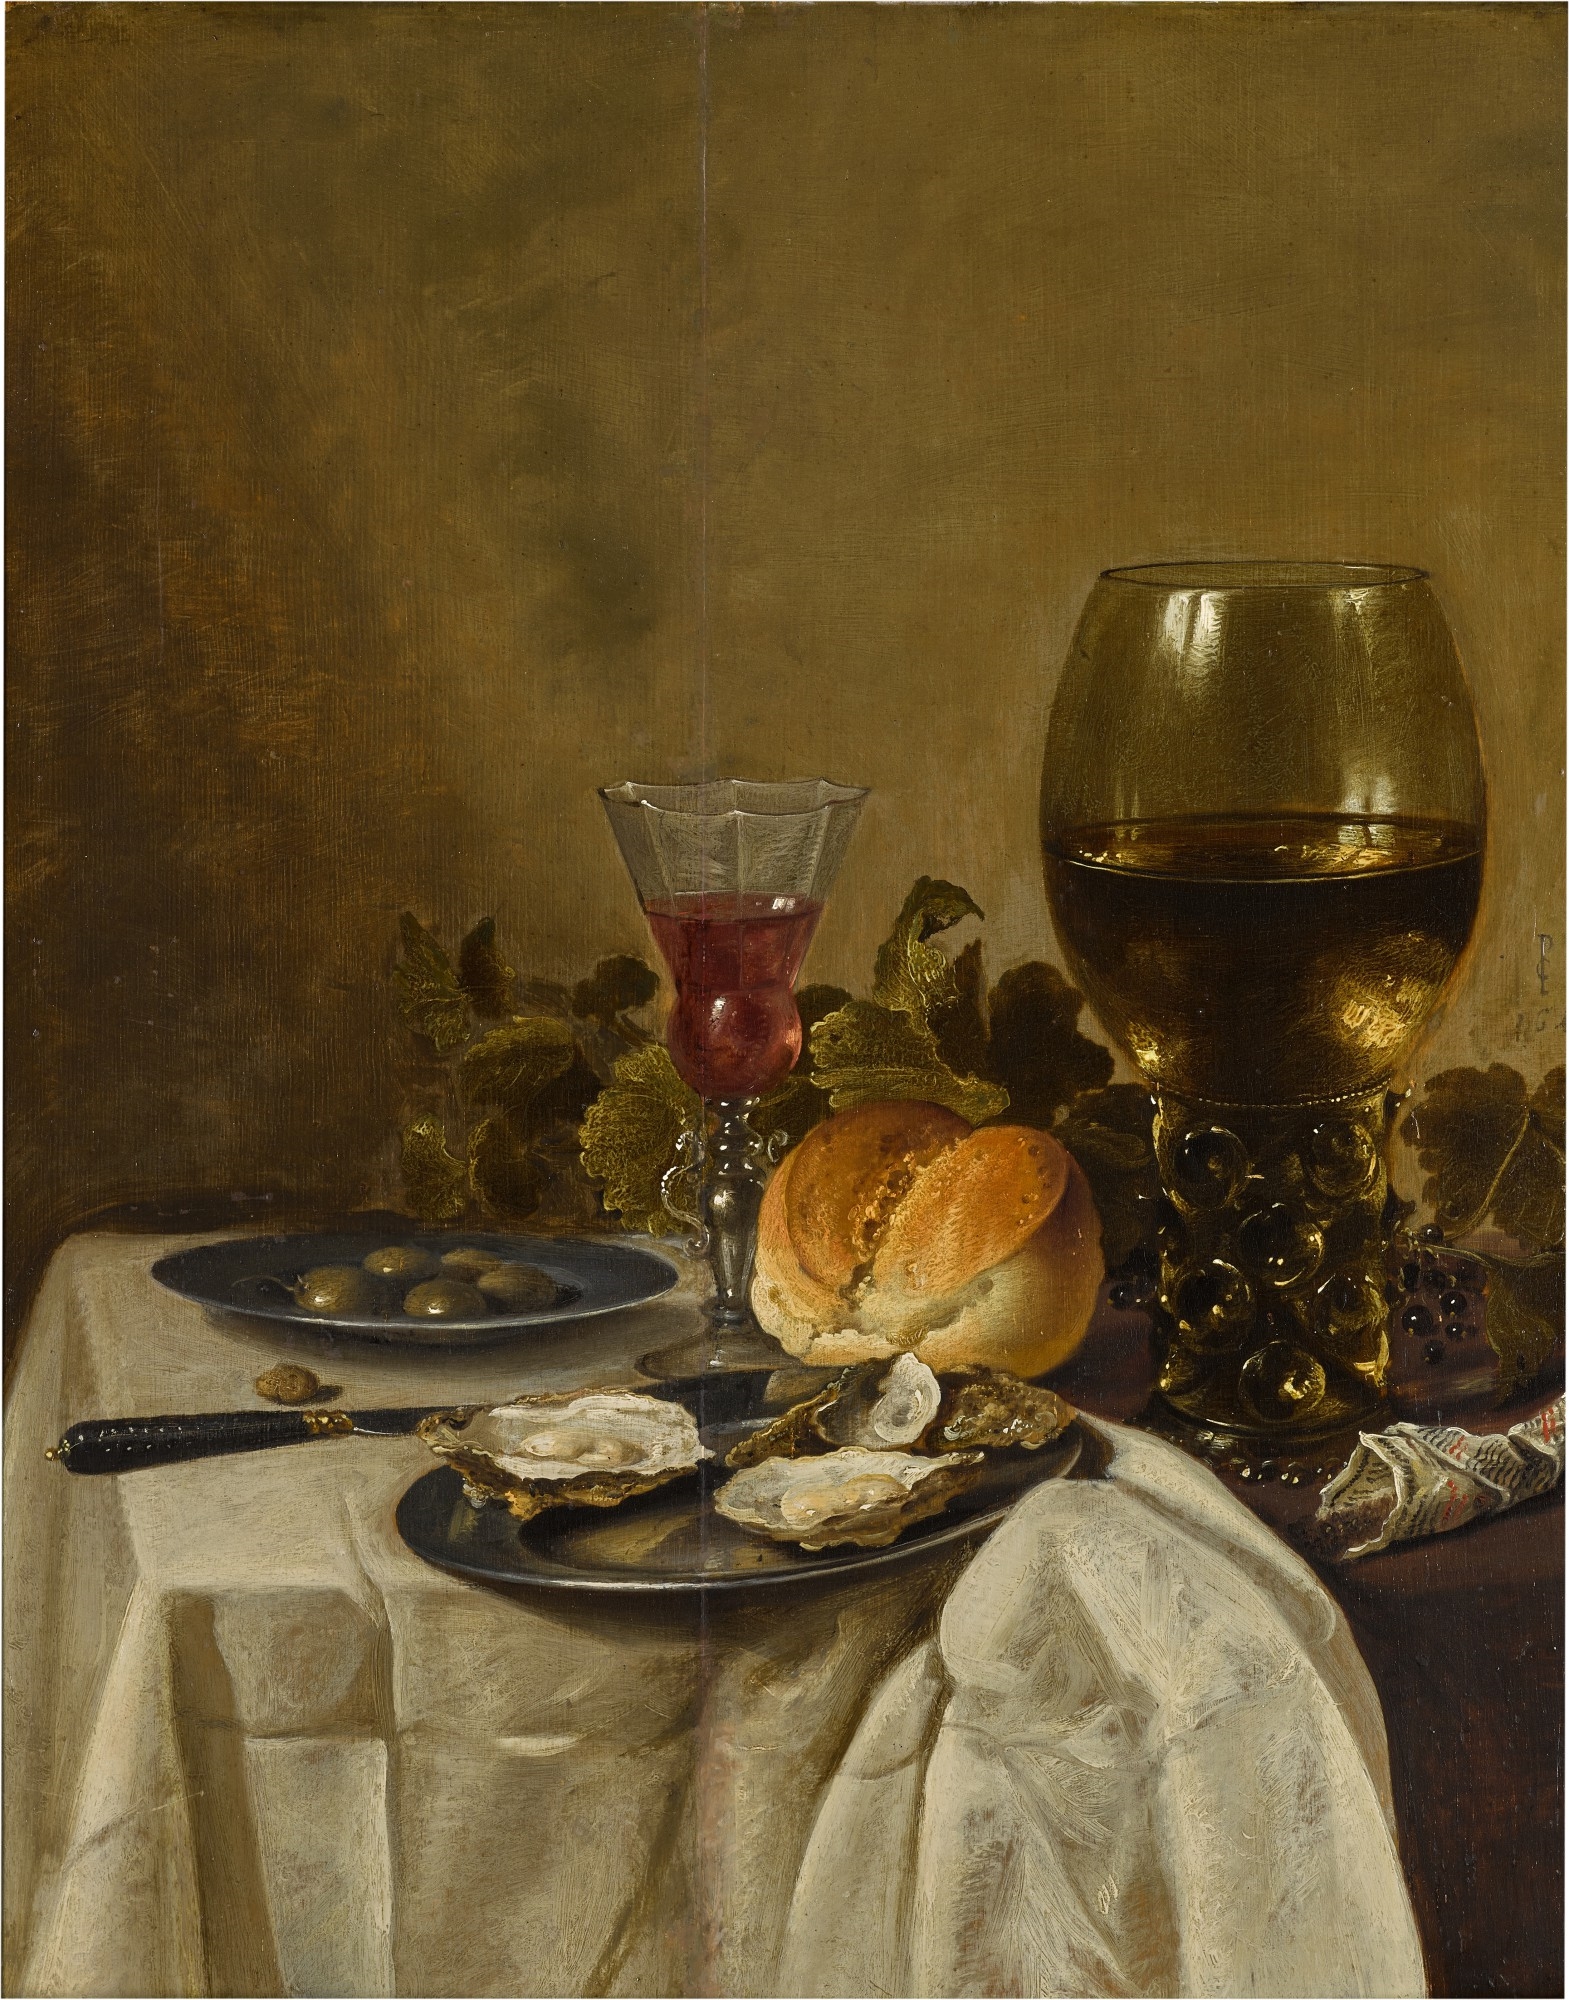 Still life with oysters, a roemer, a wine glass, bread roll and olives by Pieter Claesz, 1642